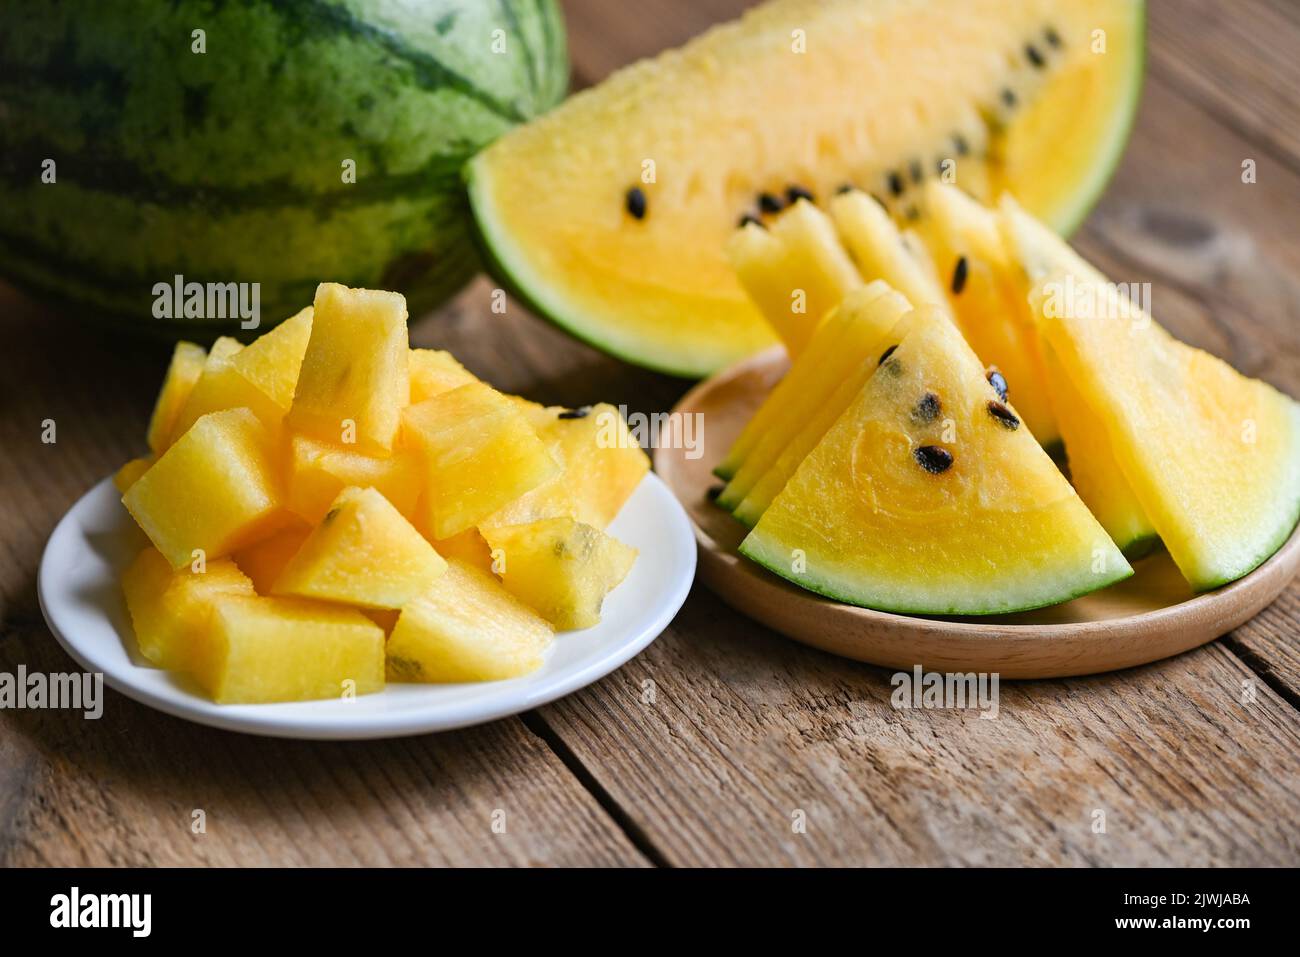 Yellow watermelon slice on plate, Closeup pile of sweet watermelon slices pieces fresh watermelon tropical summer fruit Stock Photo